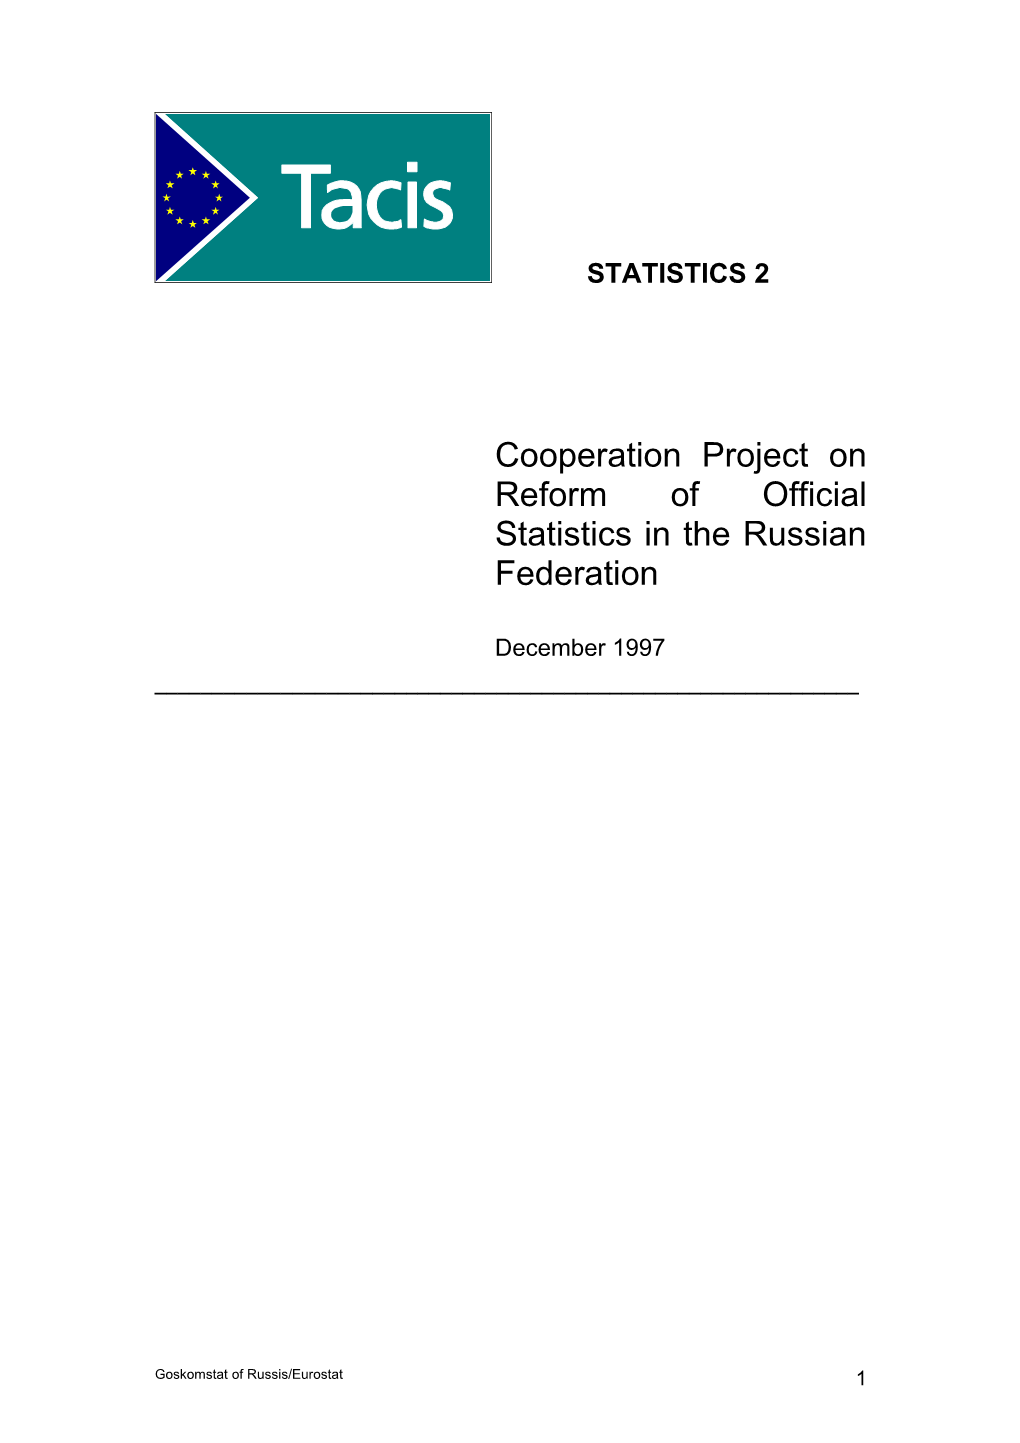 Project on Reform of Official Statistics in Russia